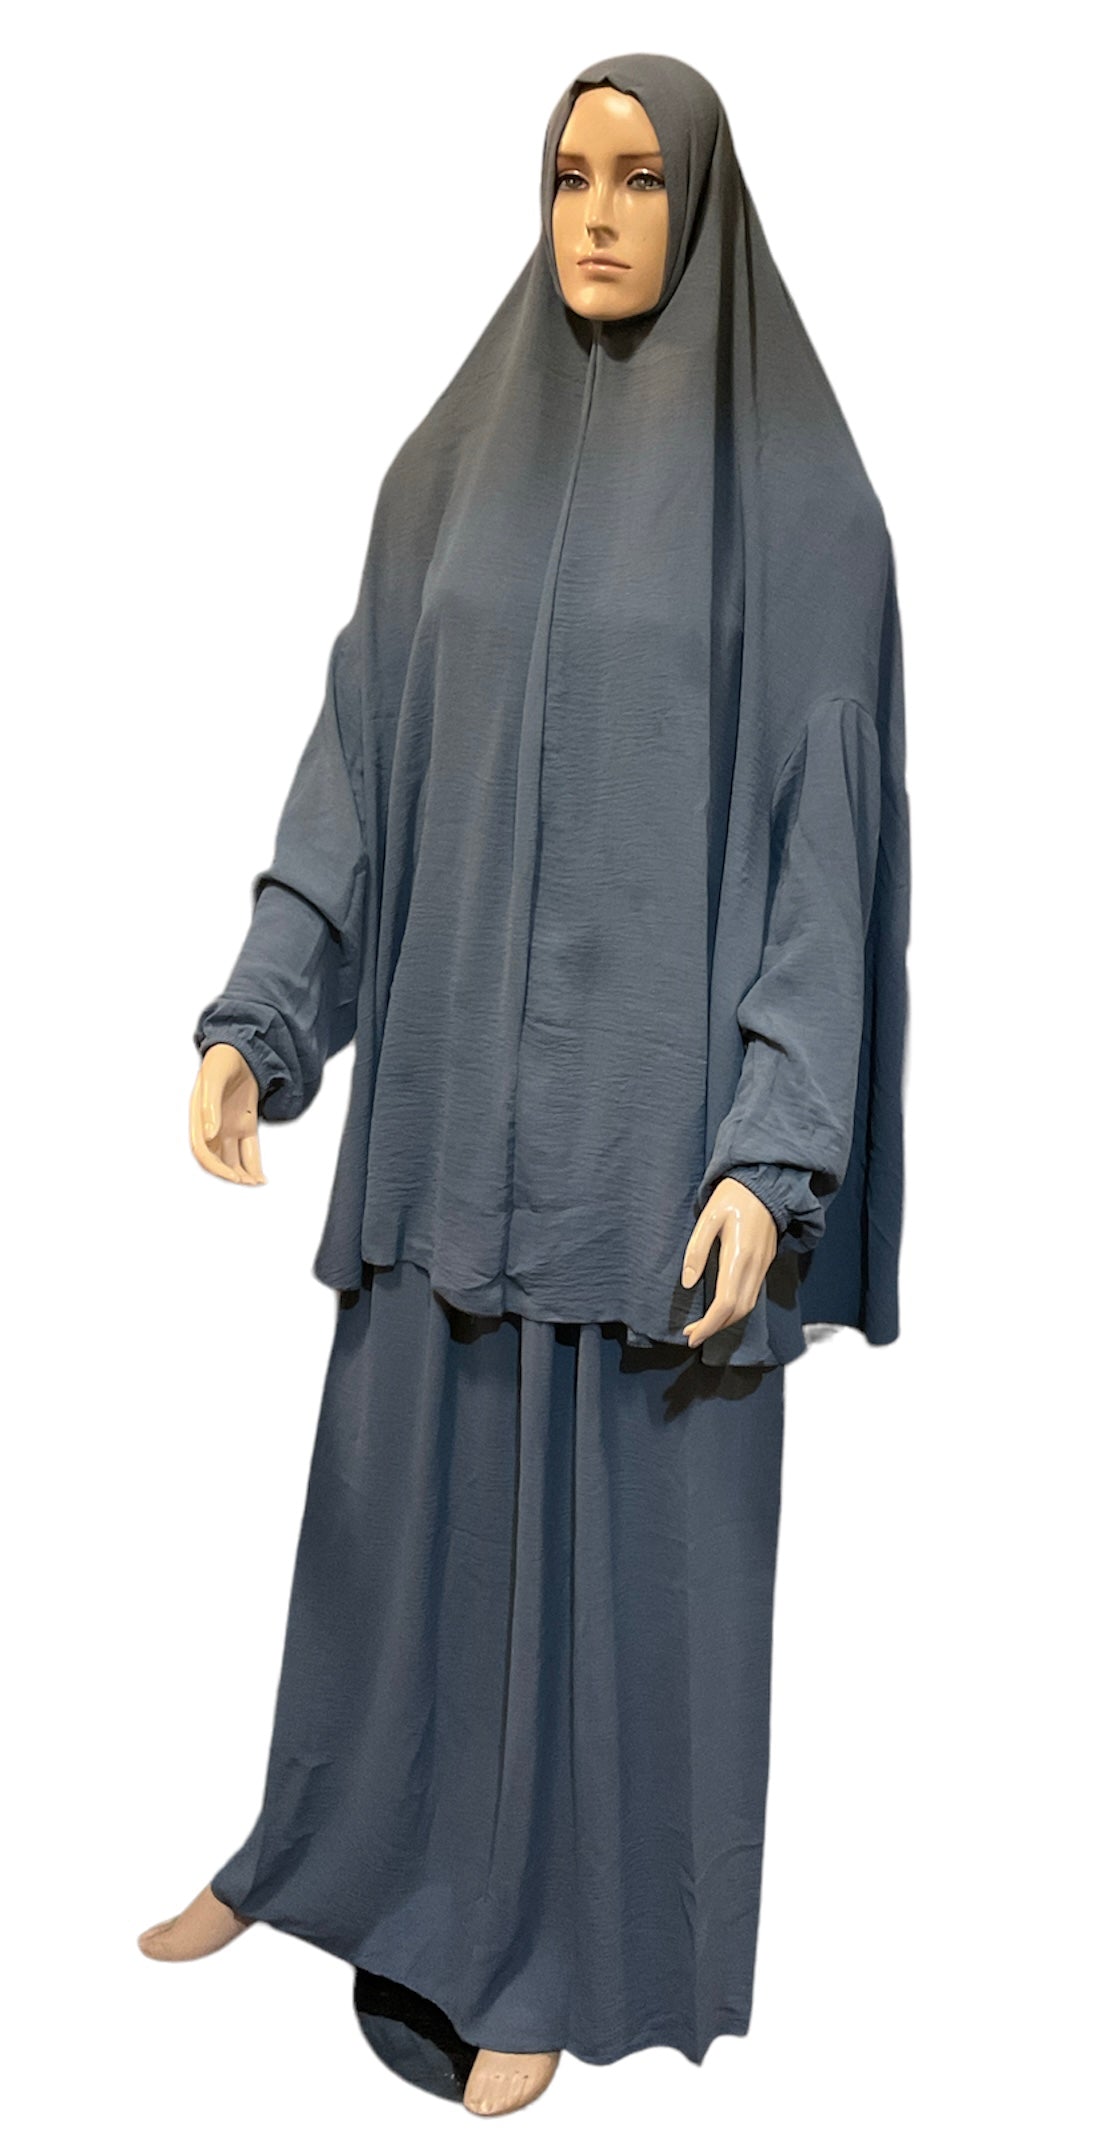 Muslim Women Two-Piece Prayer Outfit - Plain Colored.